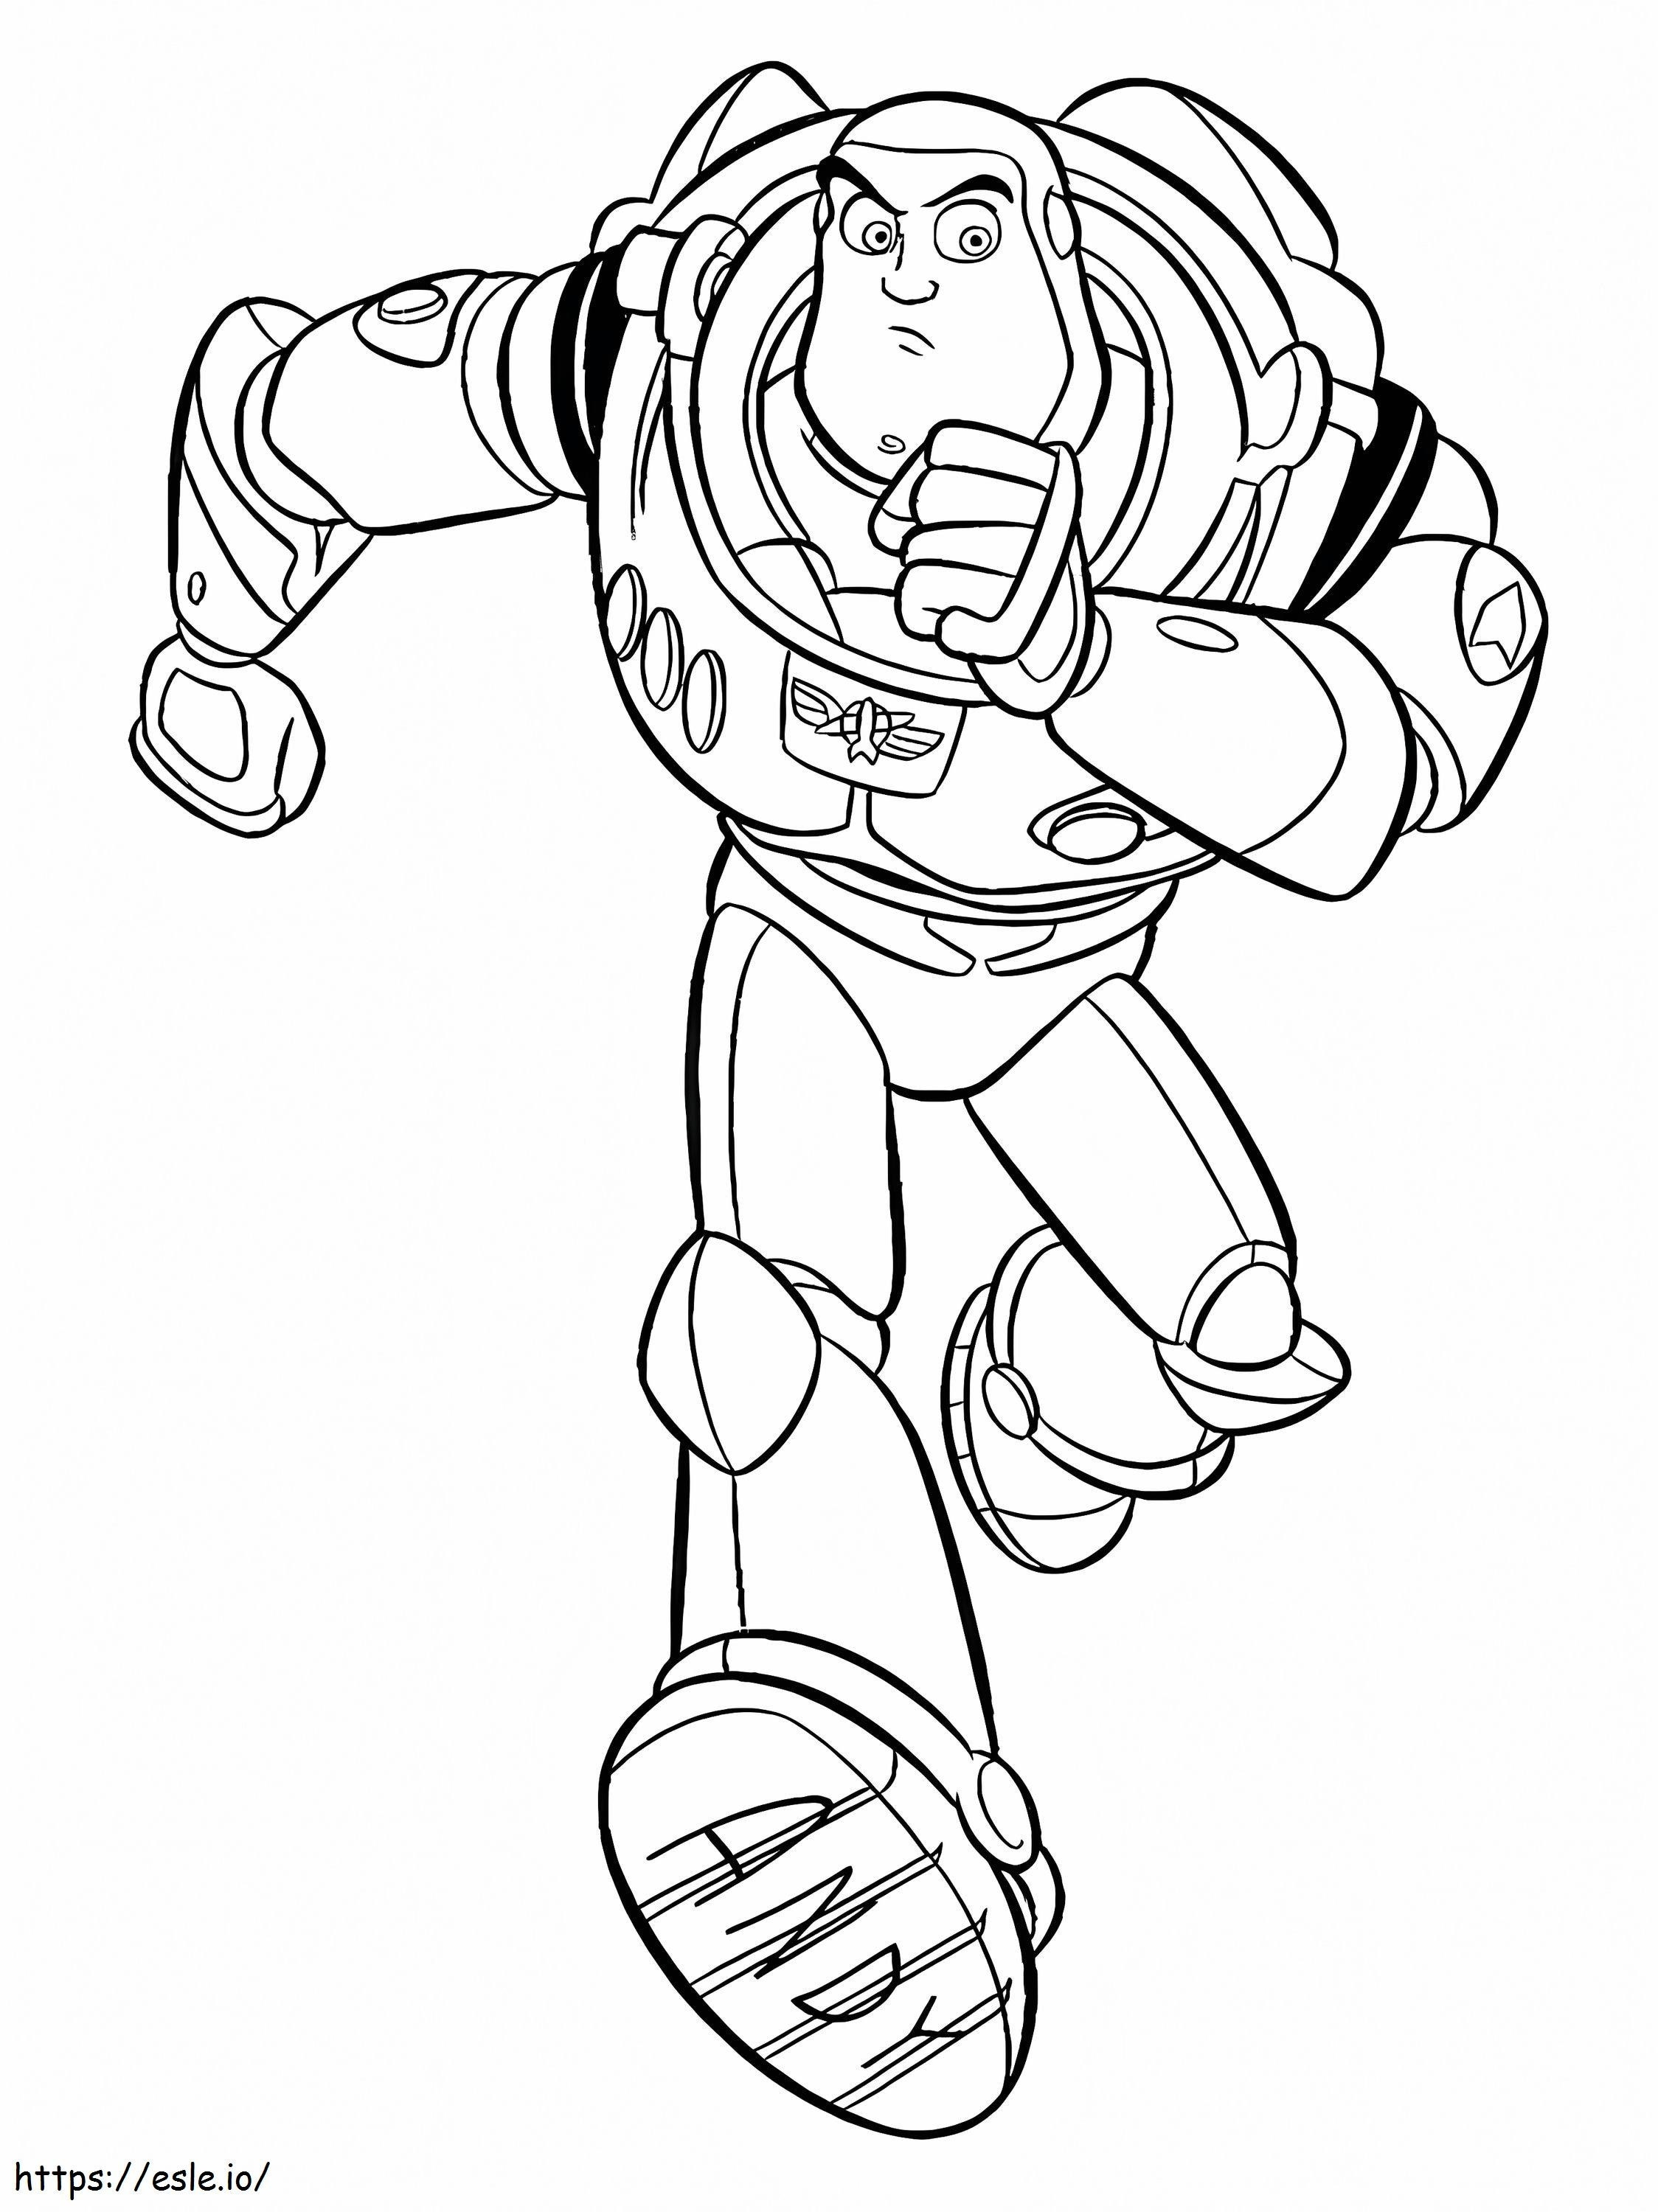 Buzz Lightyear Running coloring page